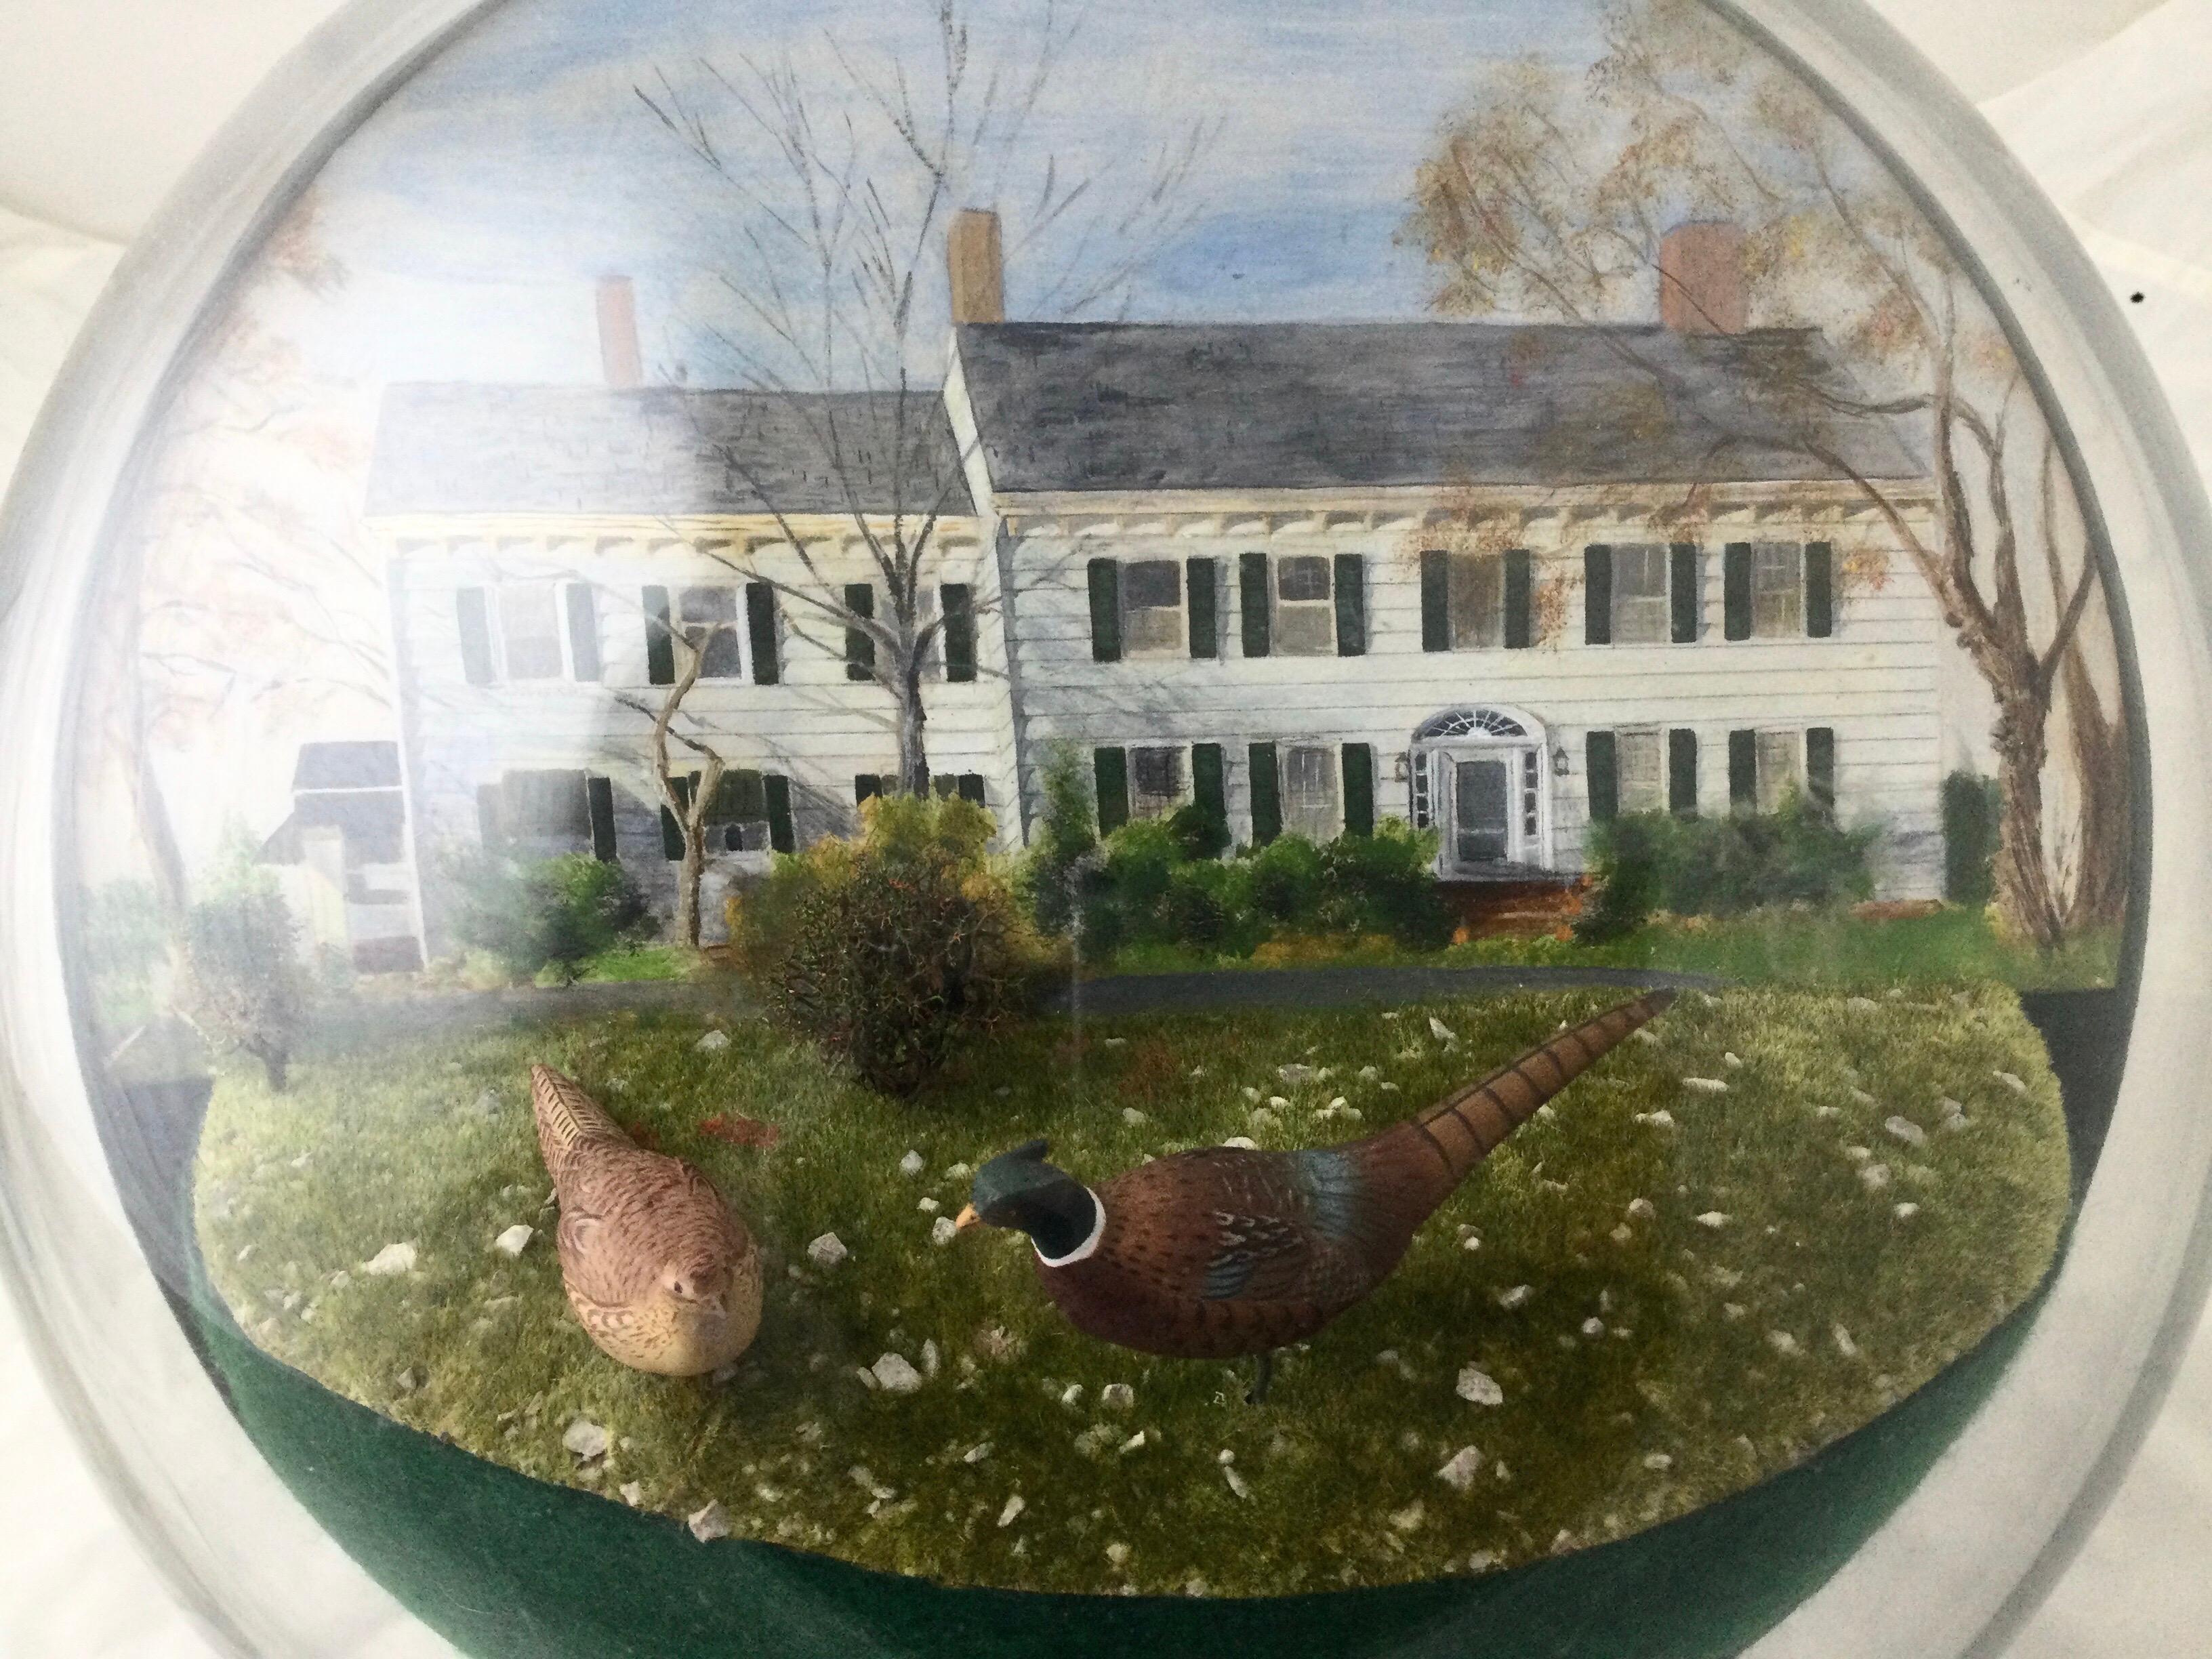 Wonderful Round Diorama of American home hand painted with hand painted carved birds. The house looks like a beautiful hand painted watercolor. The birds are hand carved and painted. Looks like the trees and sound are good quality early train